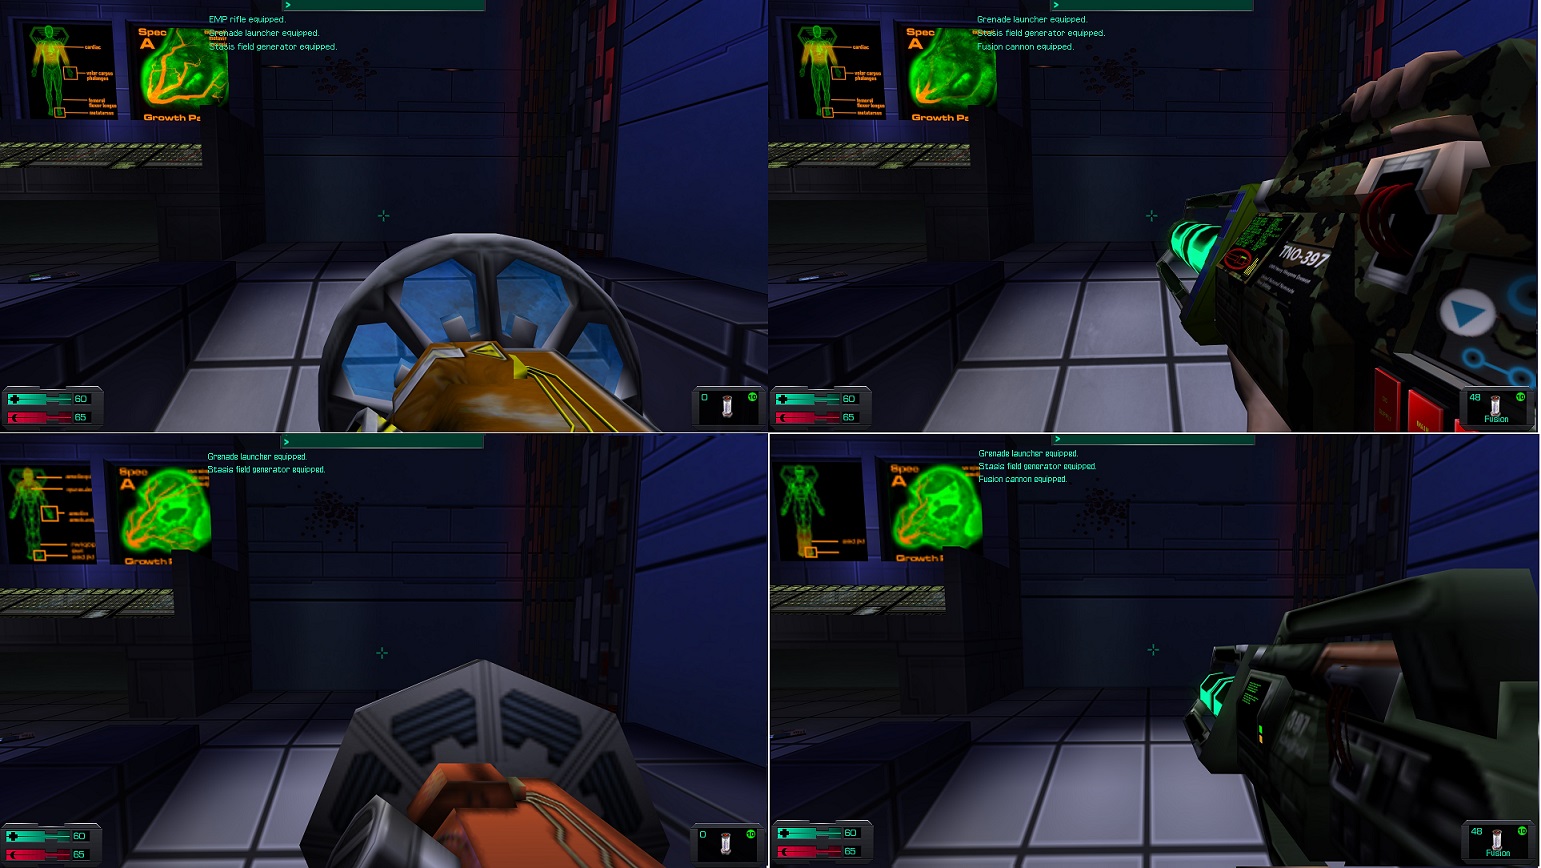 how to download system shock 2 mods